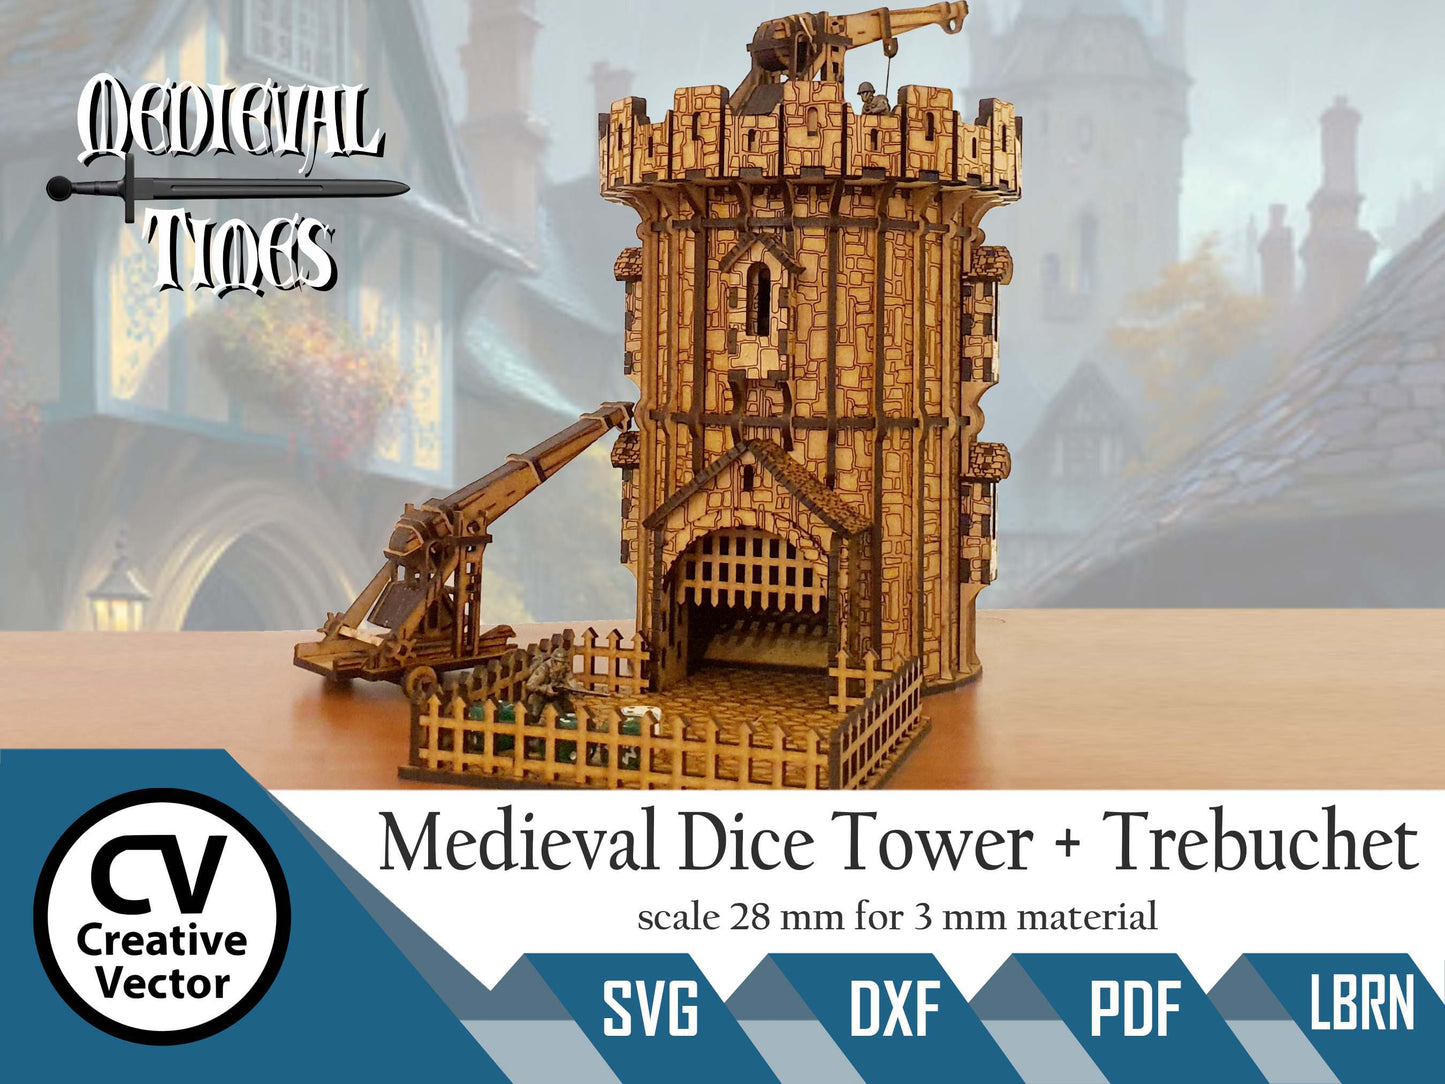 Medieval Dice Tower + Trebuchet in scale 28 mm